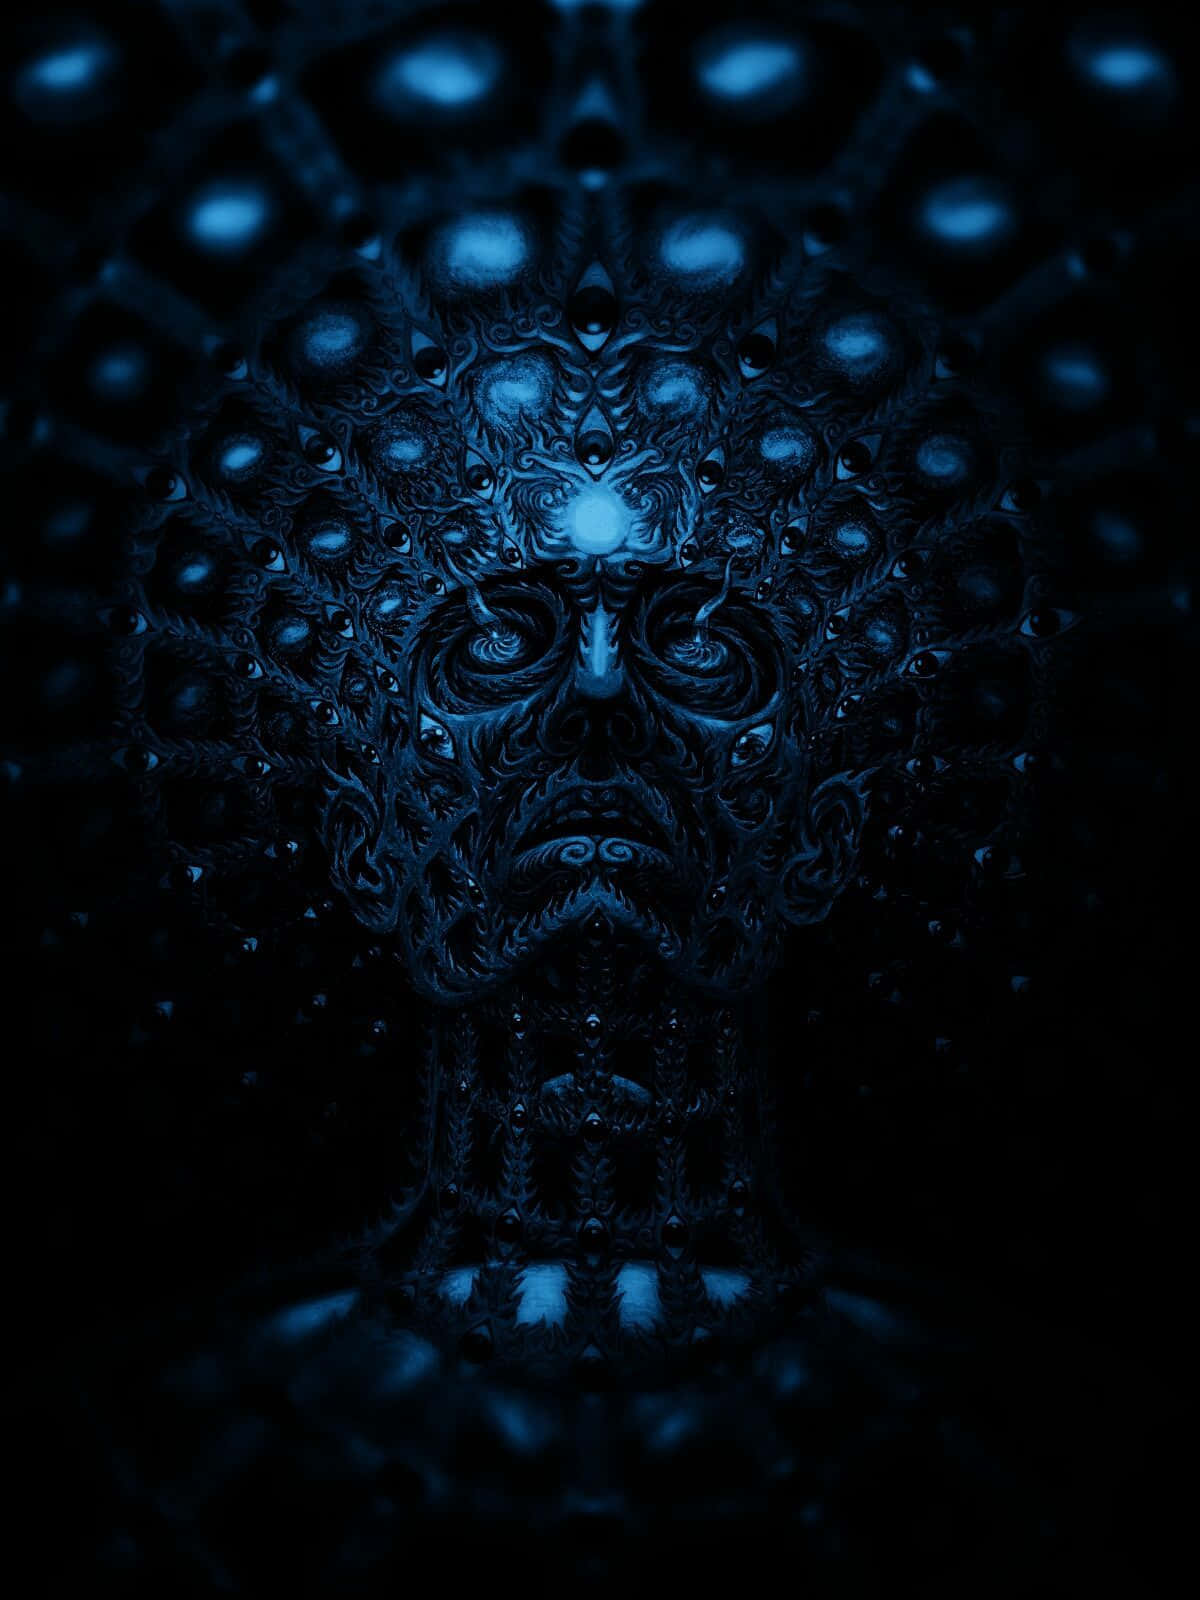 Experiencing the transcendent nature of Tool's mesmerizing sound Wallpaper